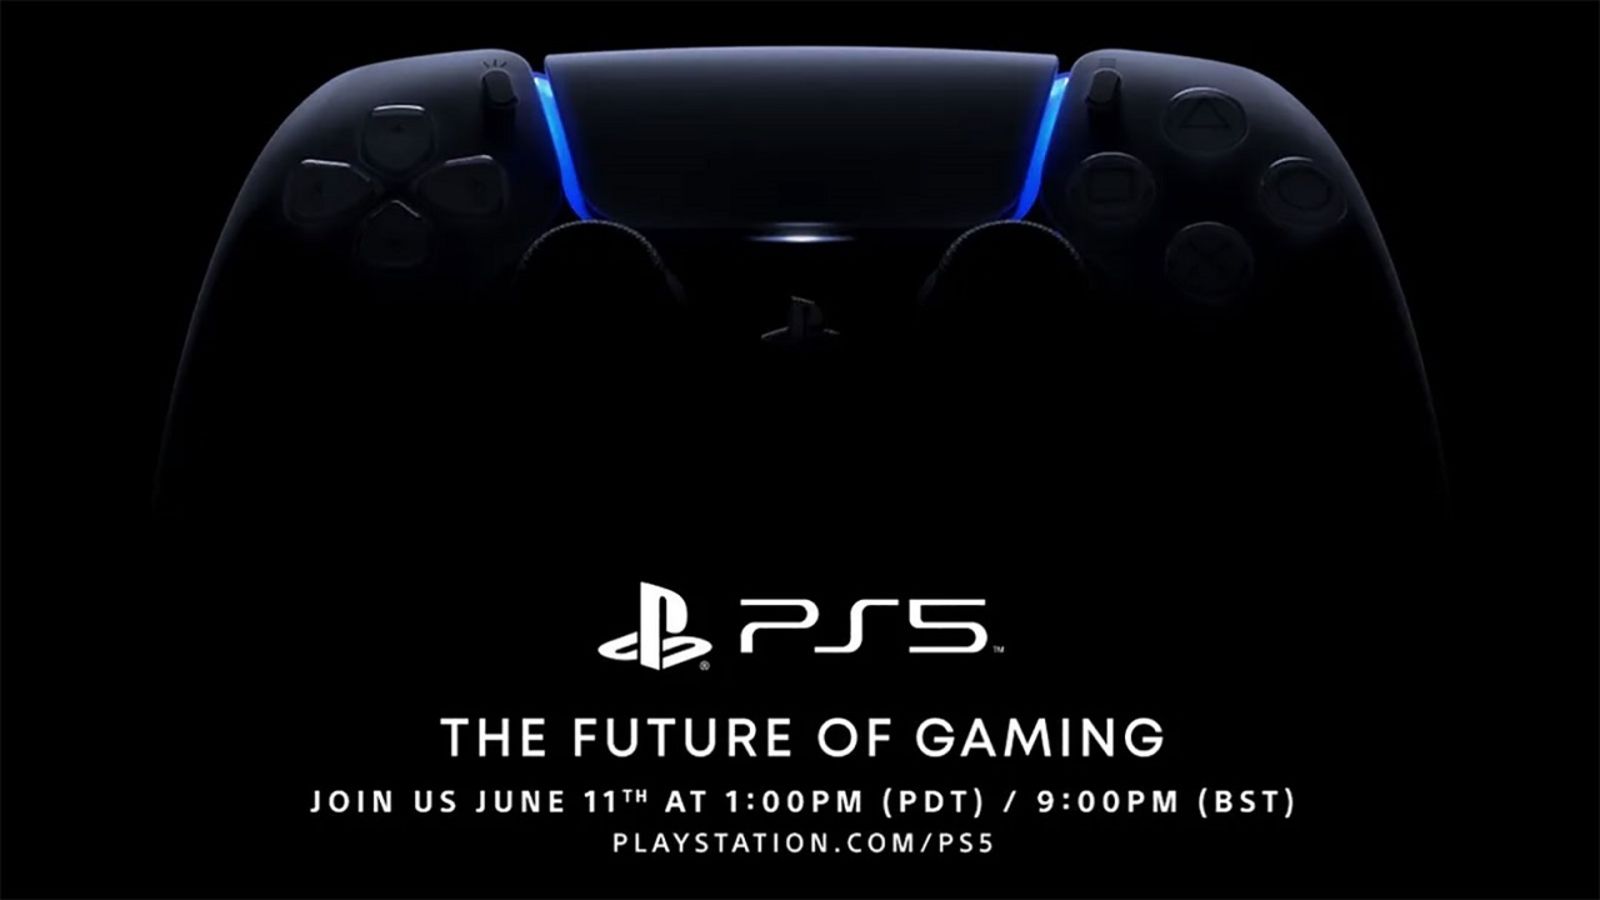 Sony's latest PlayStation 5 event to reveal compatible PS5 games